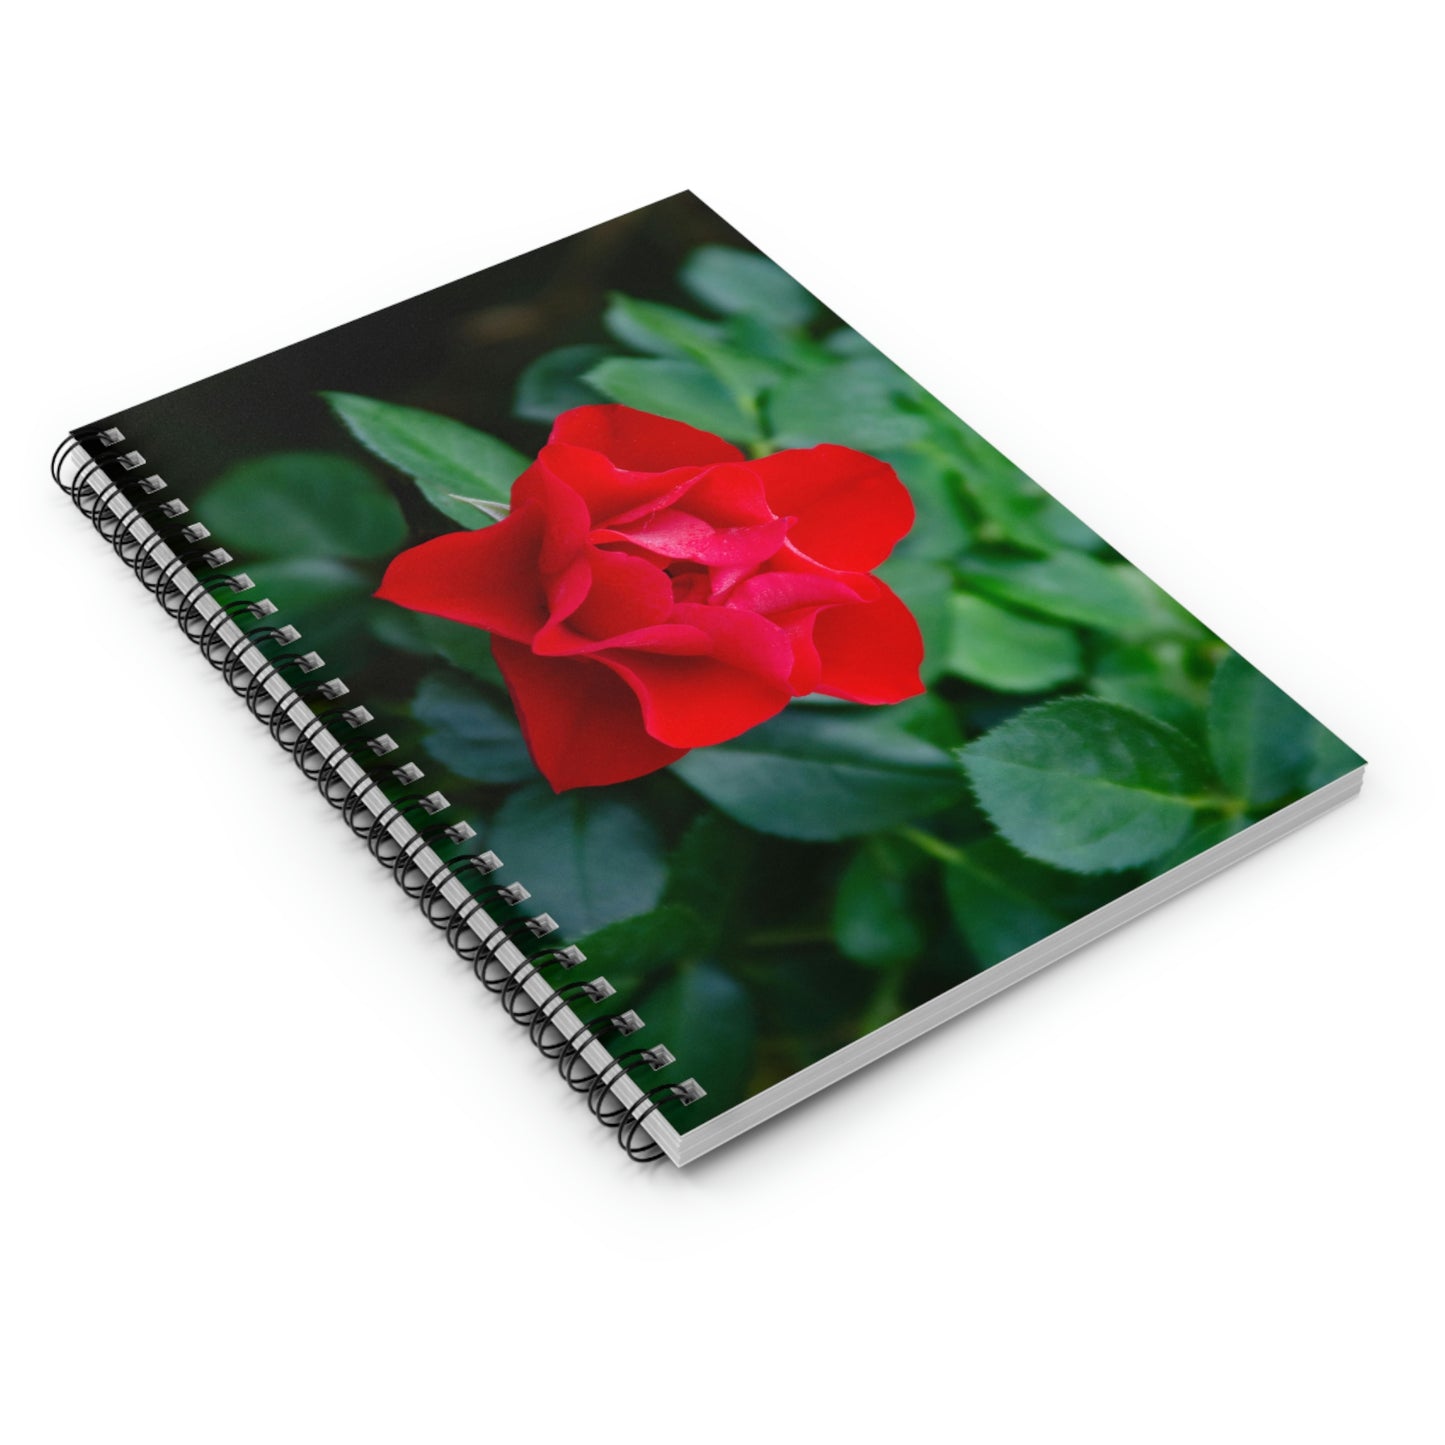 Flowers 07 Spiral Notebook - Ruled Line